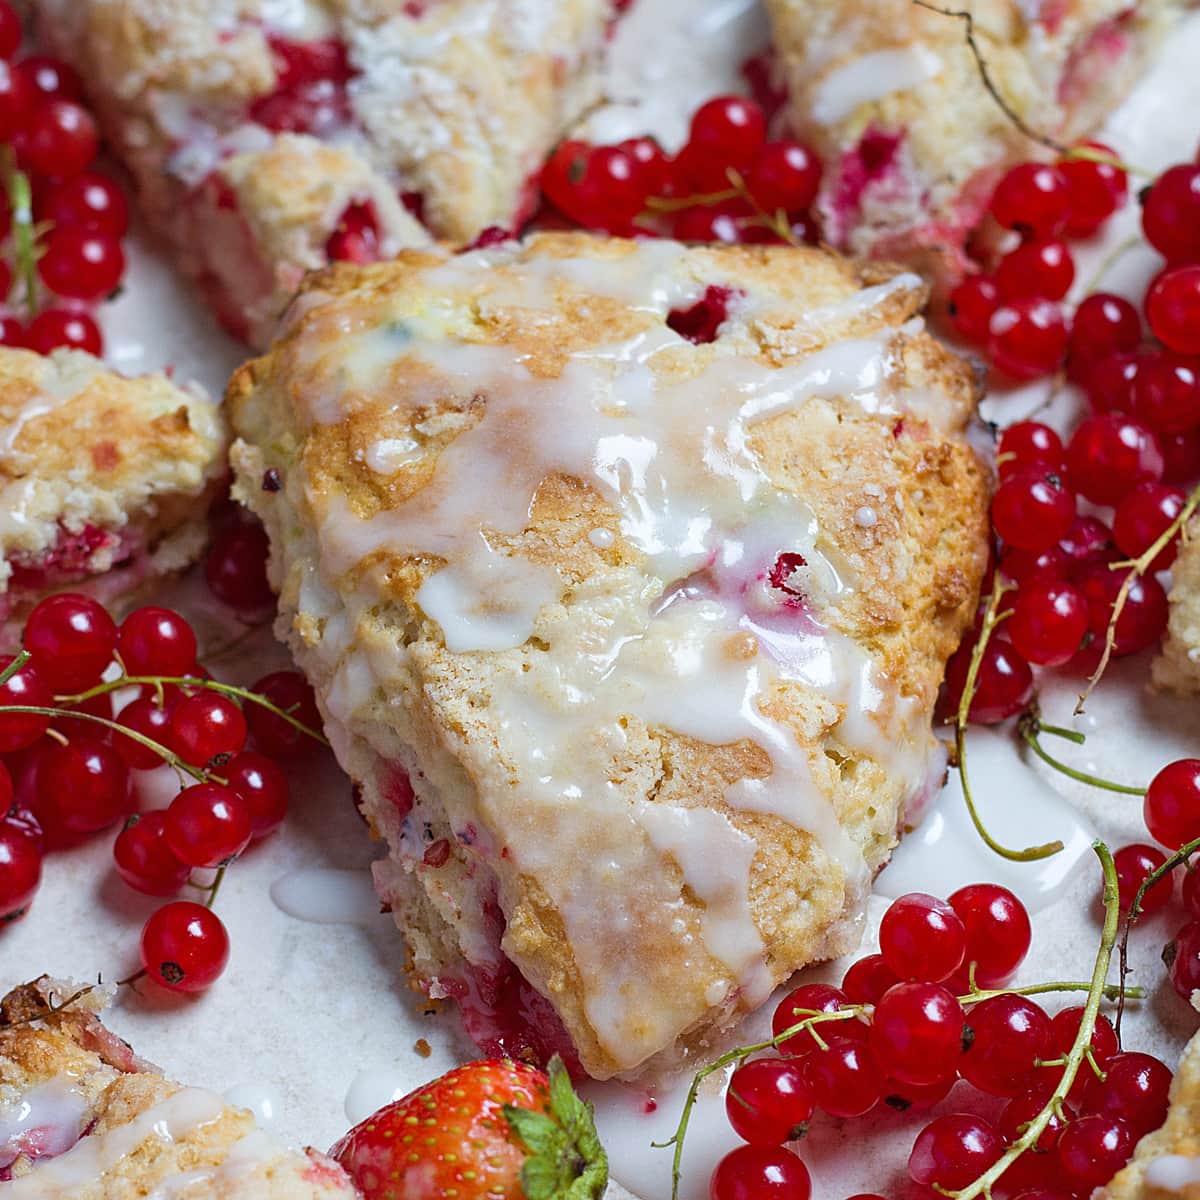 Red currant and strawberry scone.